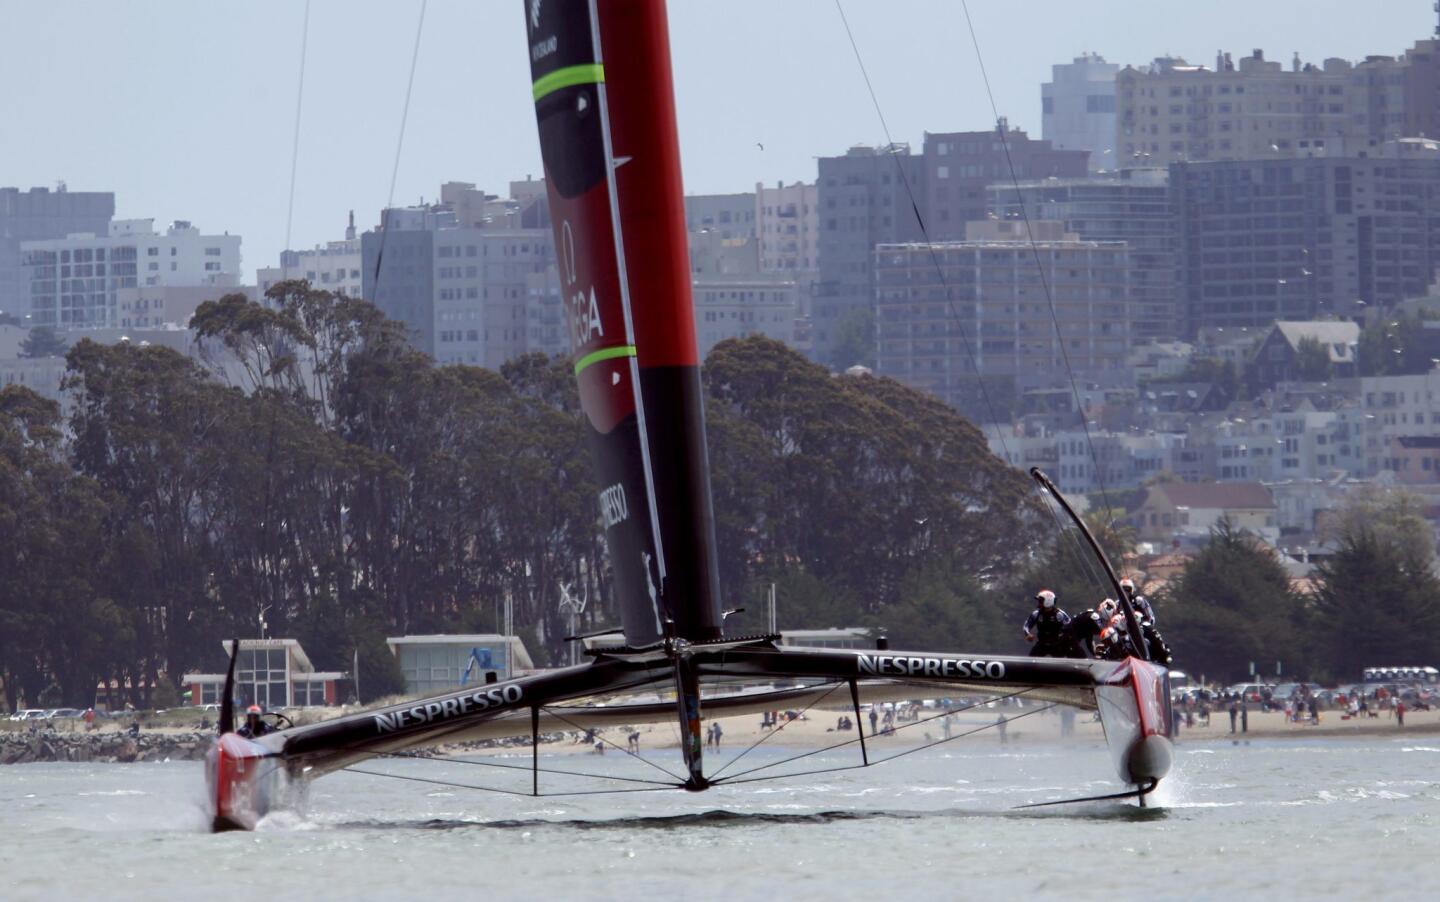 Emirates Team New Zealand sails near the city skyline during the round robin one yacht races of the Luis Vuitton Cup challenger series in the 34th America's Cup in San Francisco